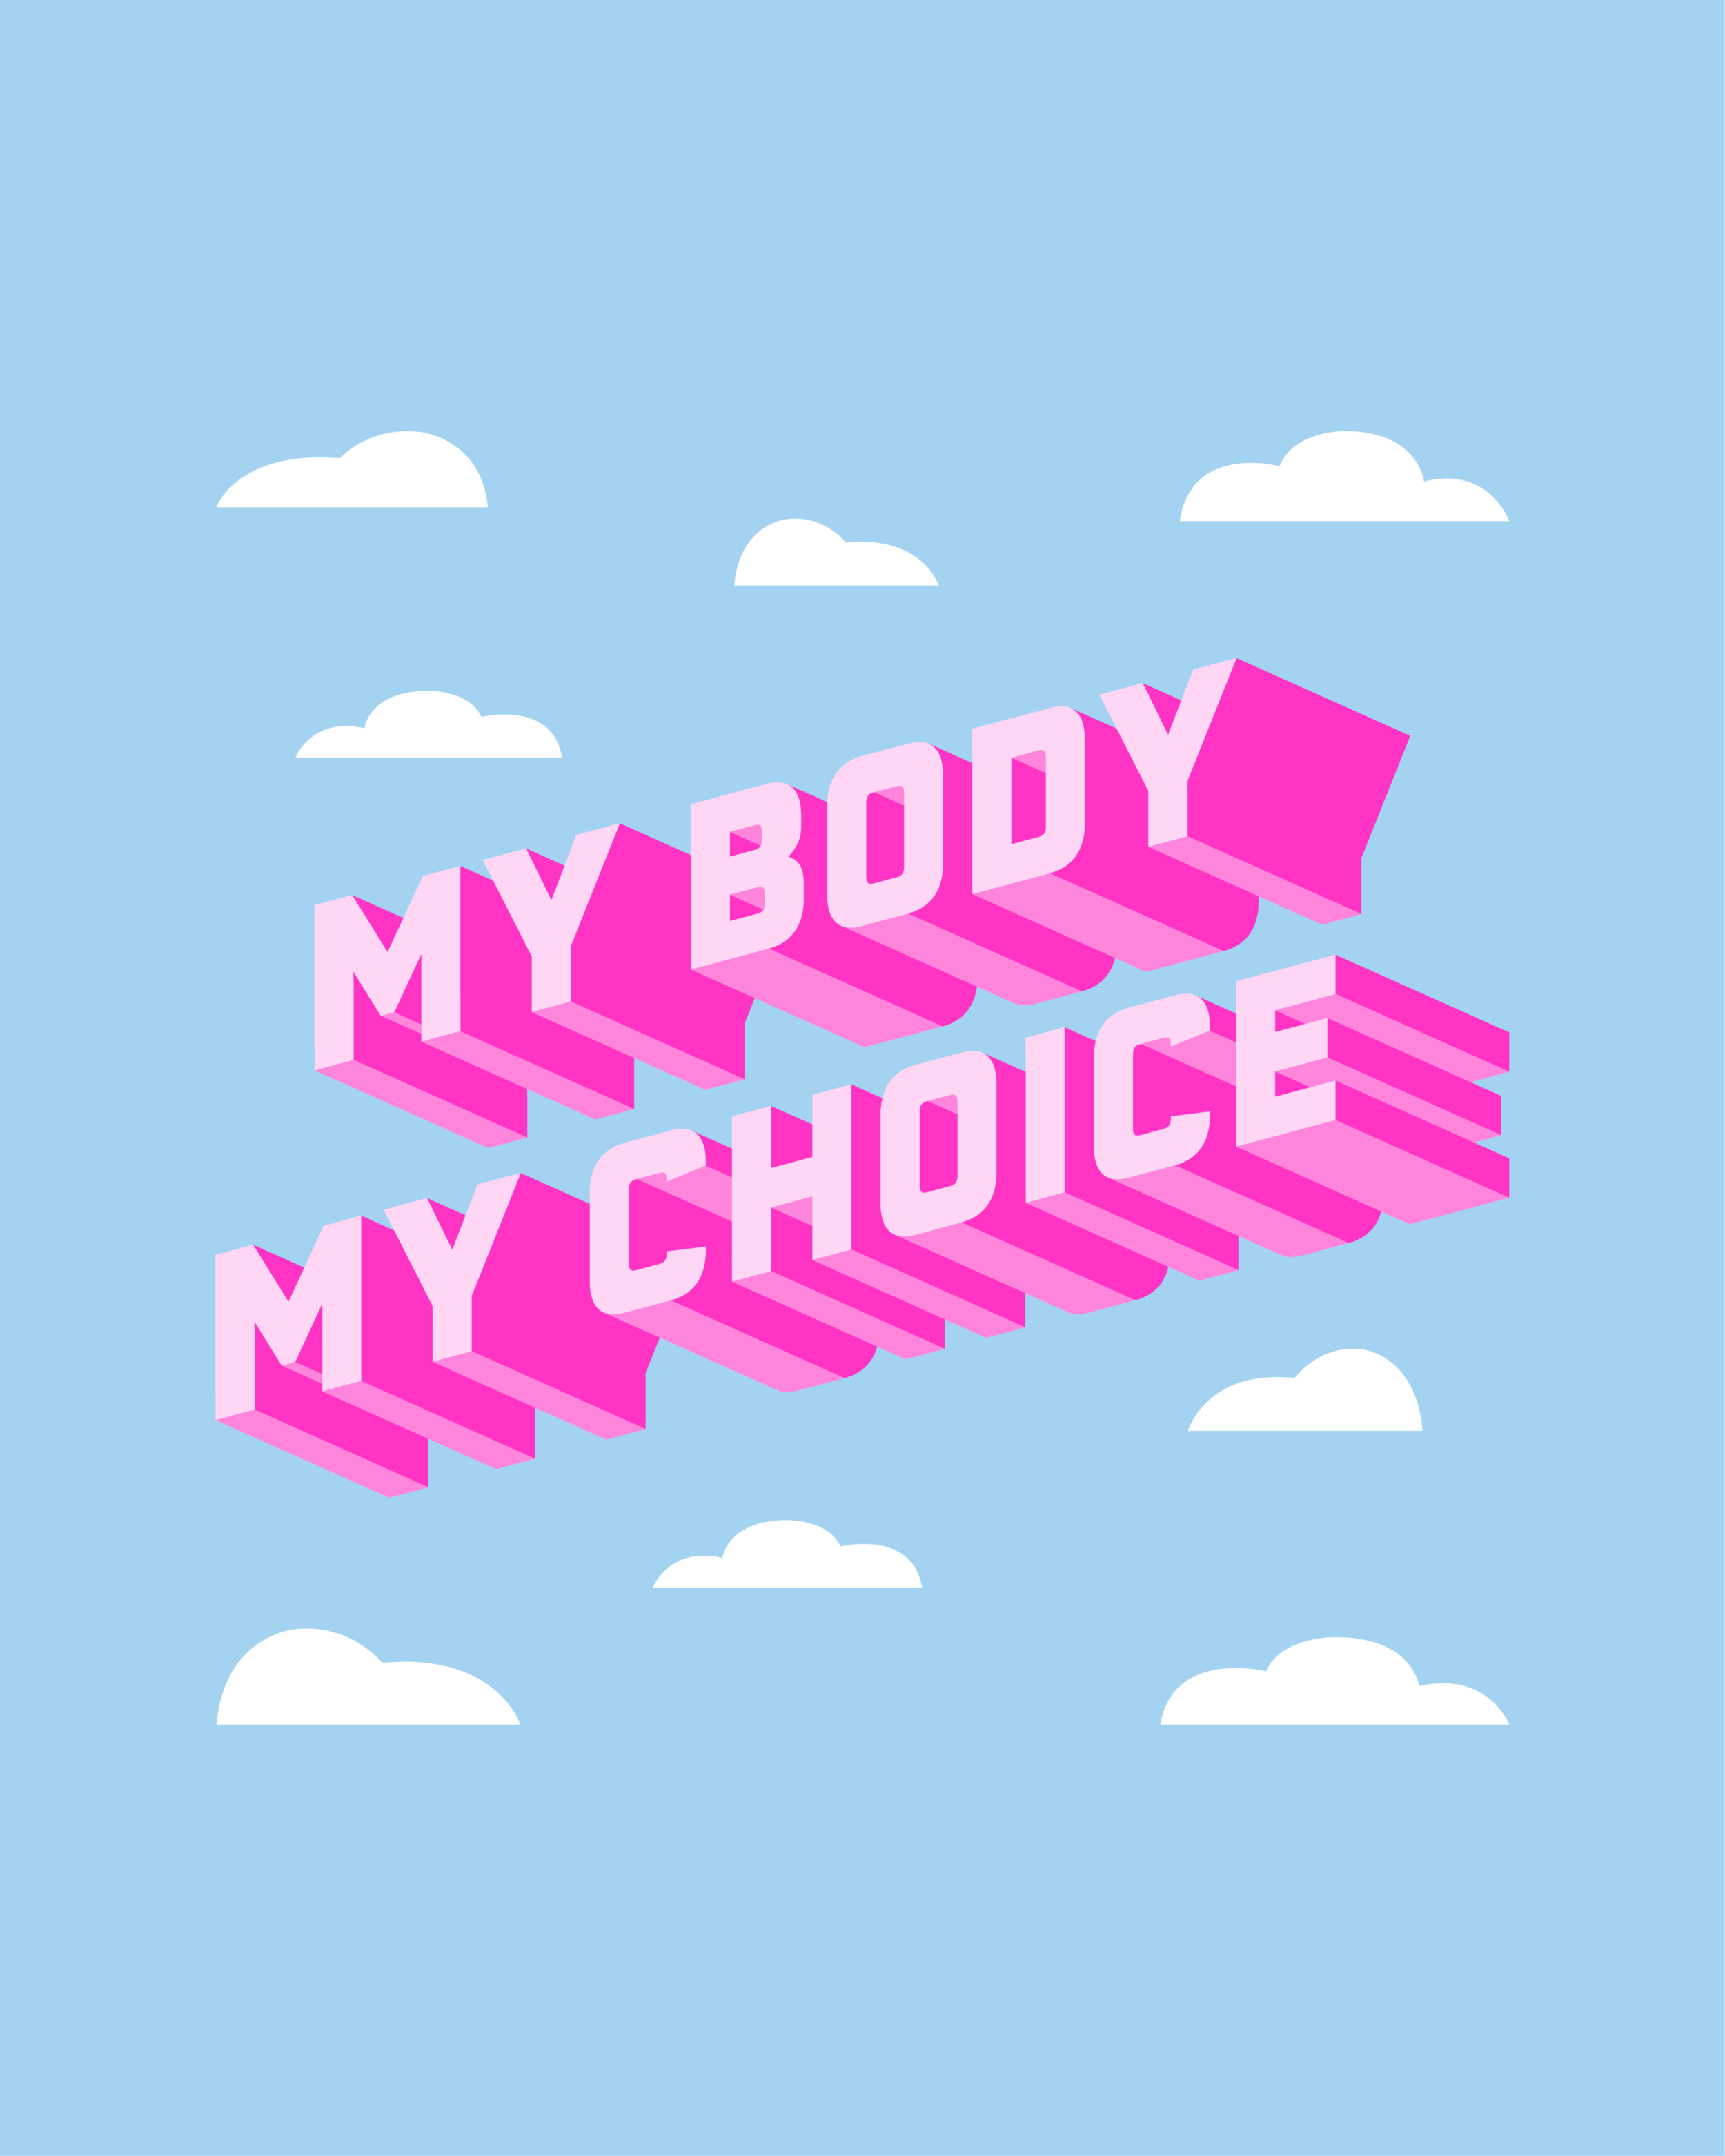 2373 My Body My Choice Images Stock Photos  Vectors  Shutterstock